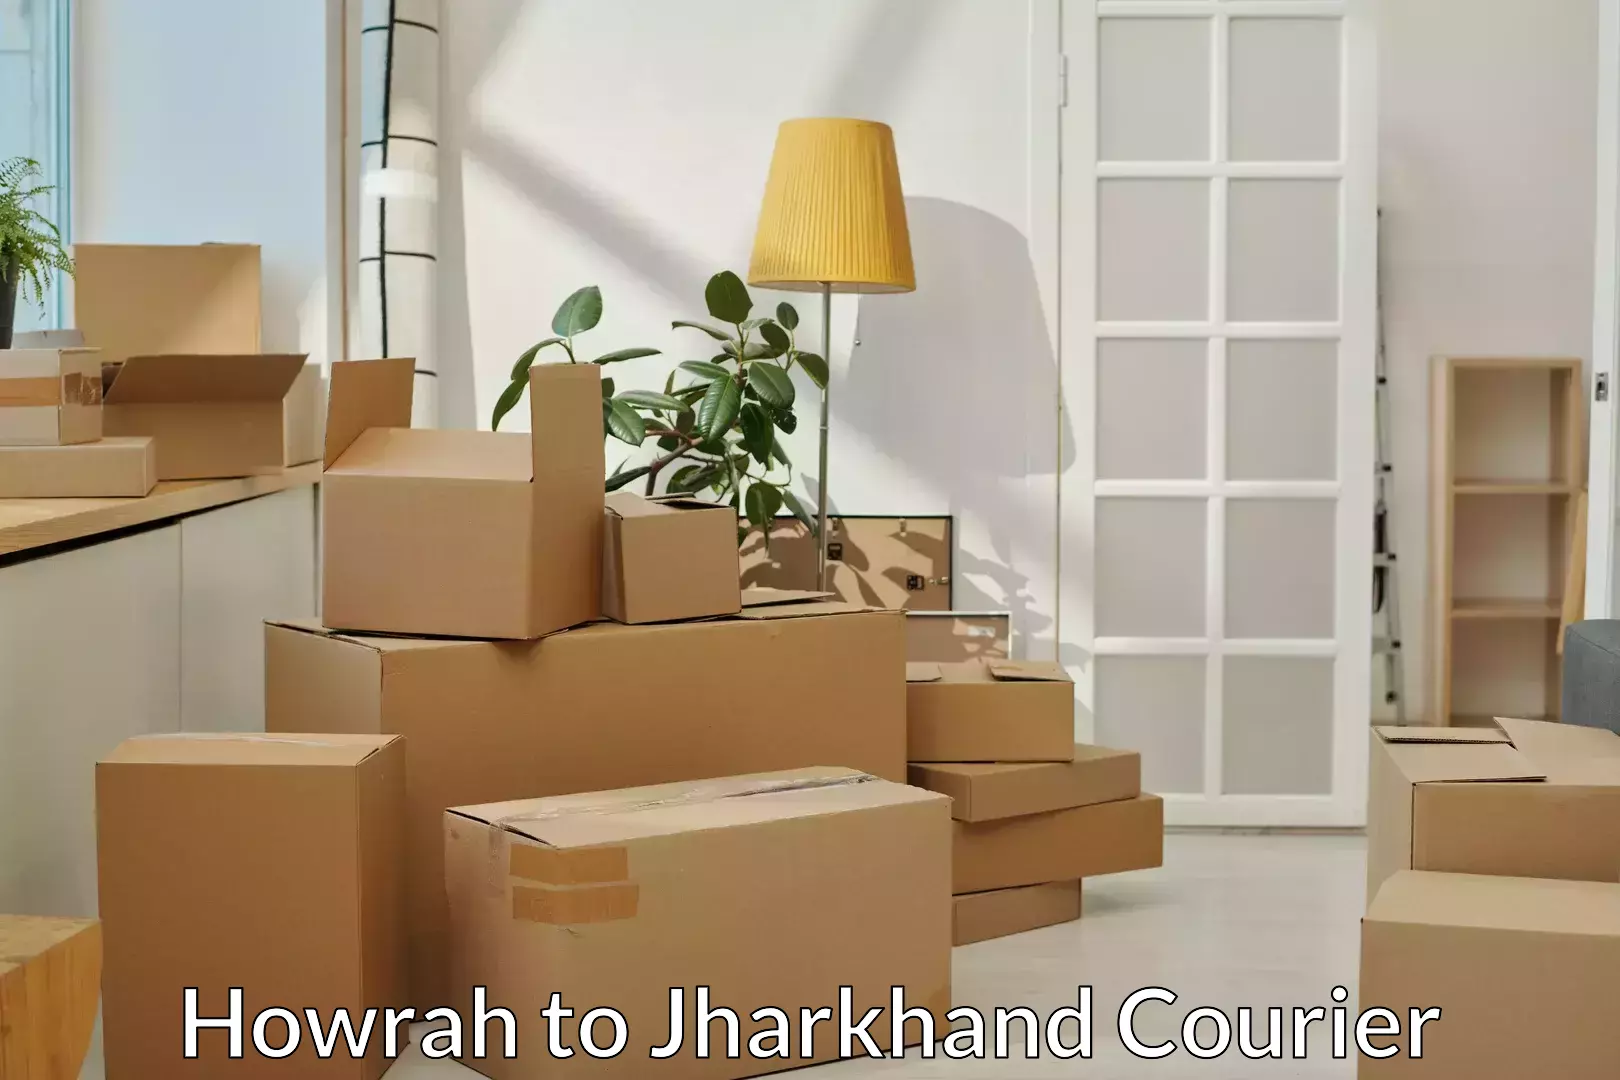 Furniture delivery service Howrah to Jamshedpur